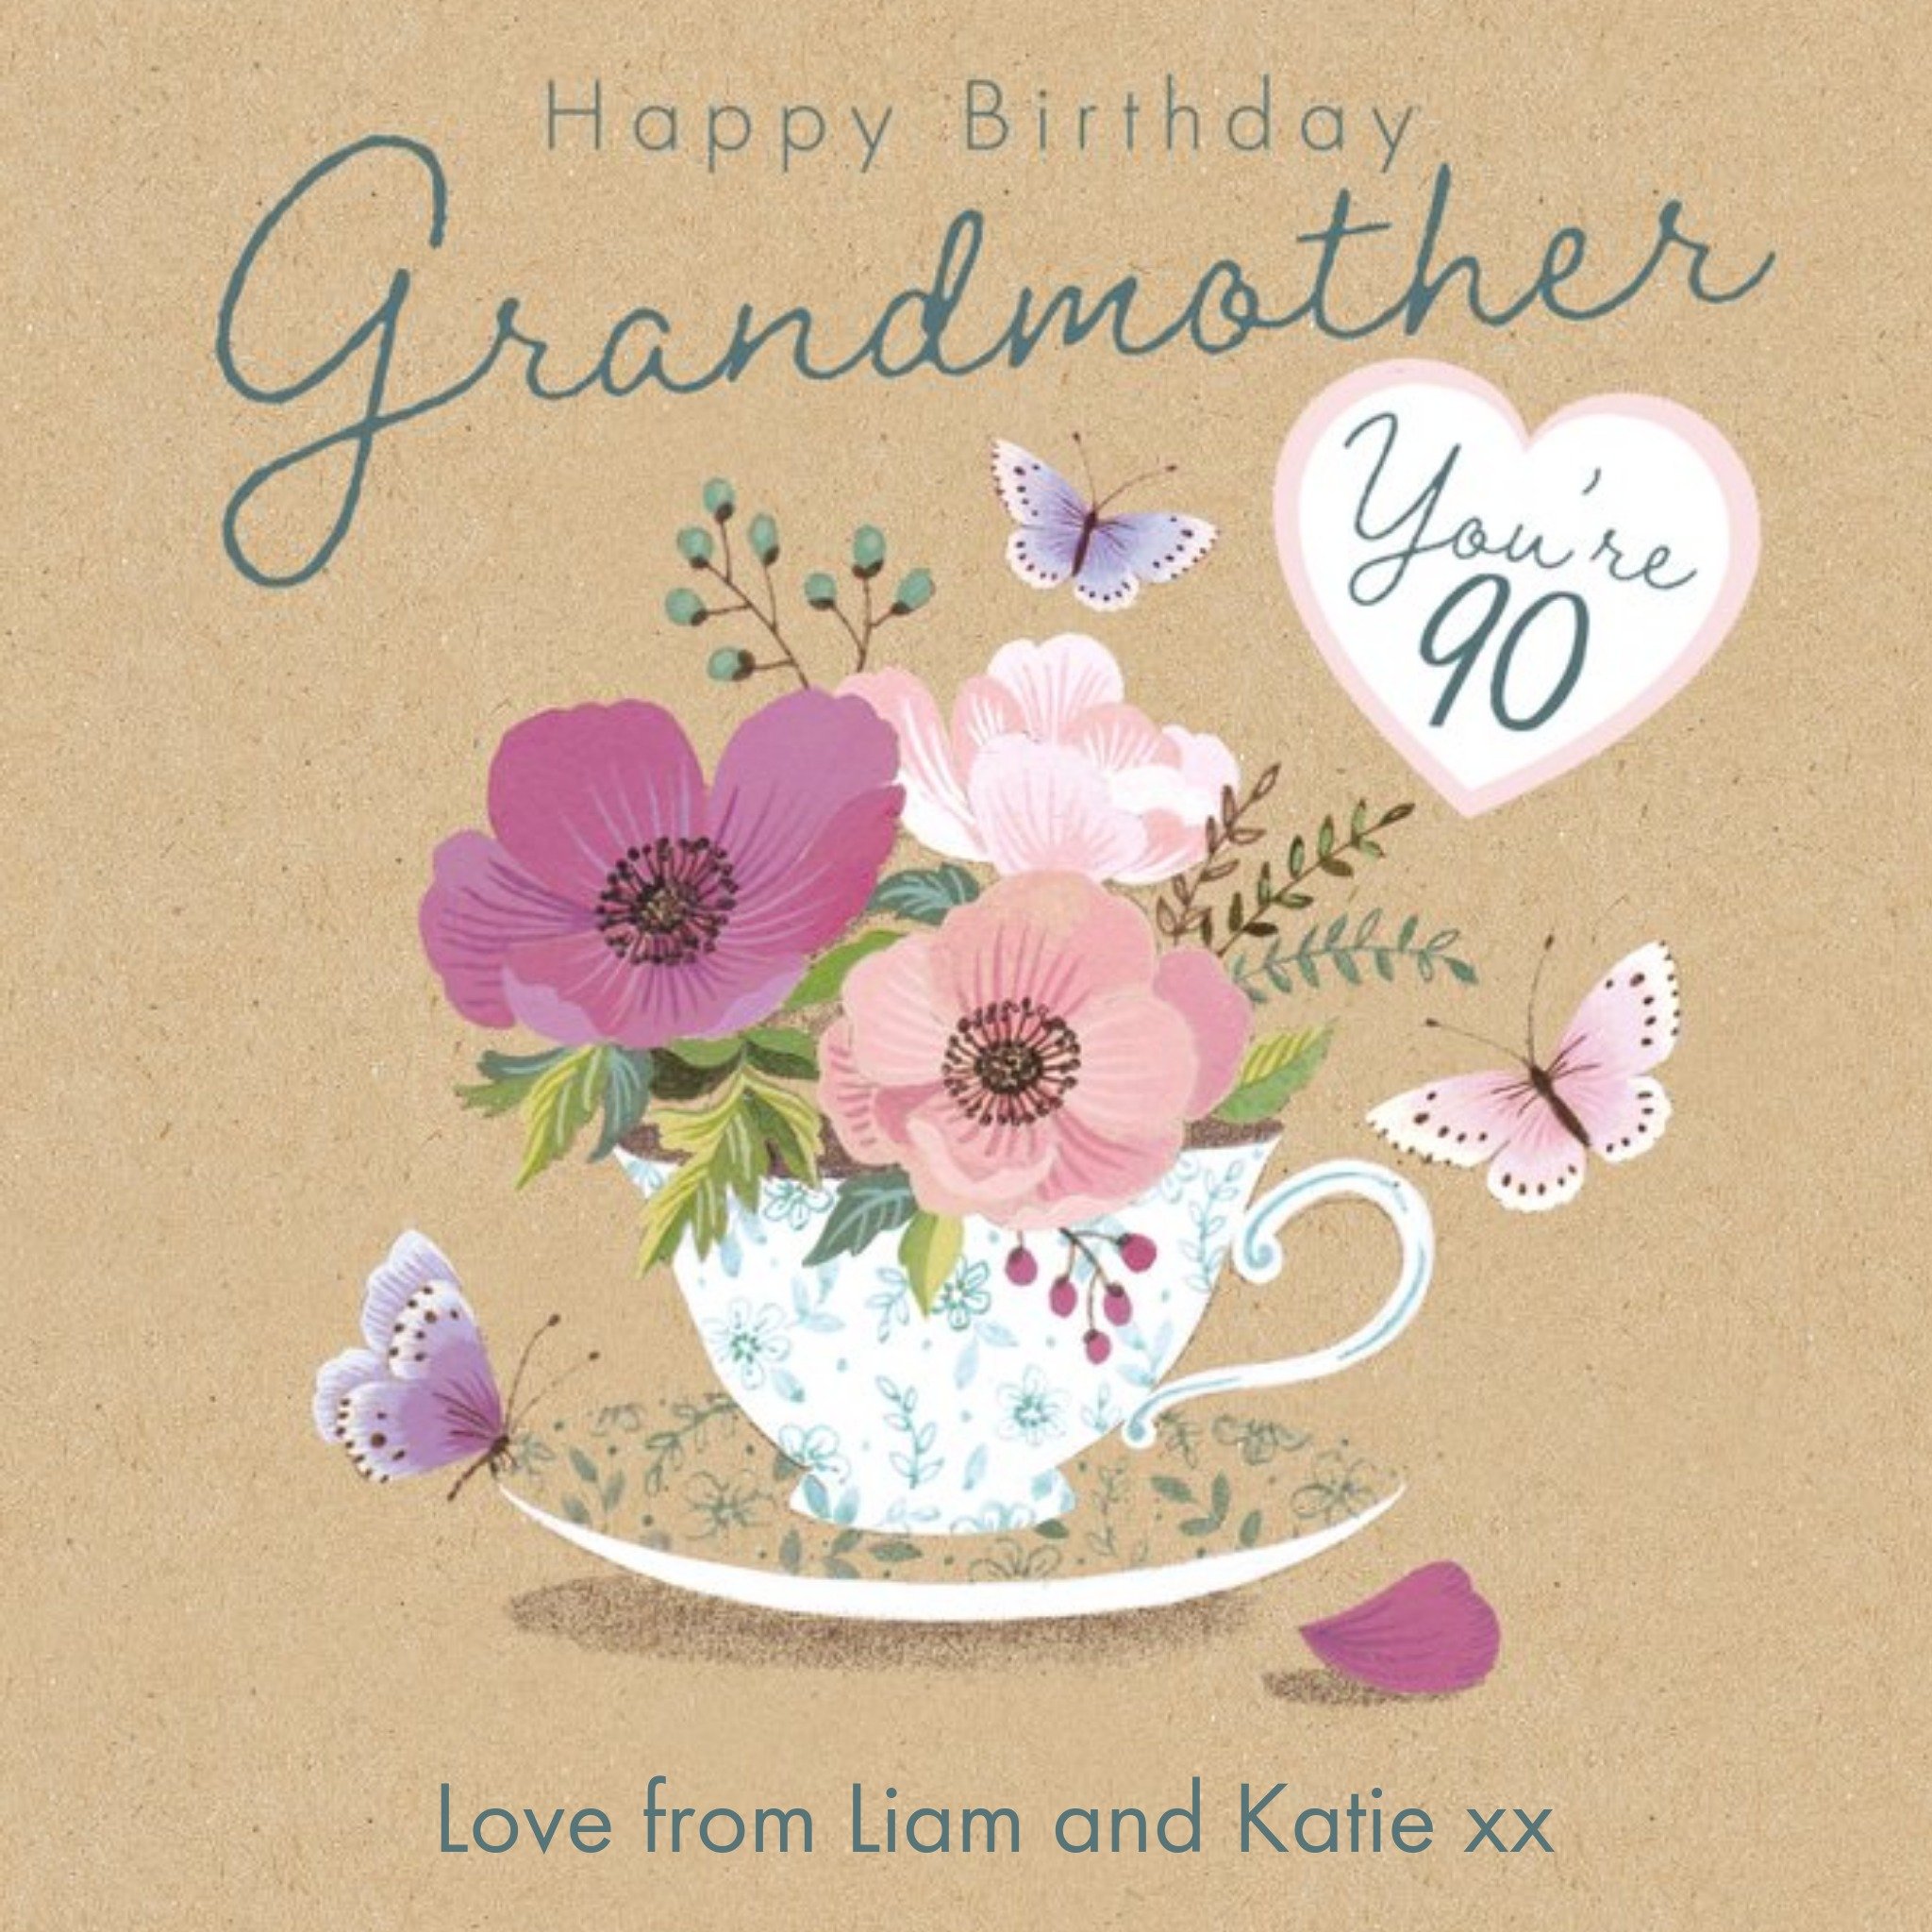 Moonpig Illustration Of Butterflies And A Tea Cup With Flowers Happy Birthday Grandmother You're 90 